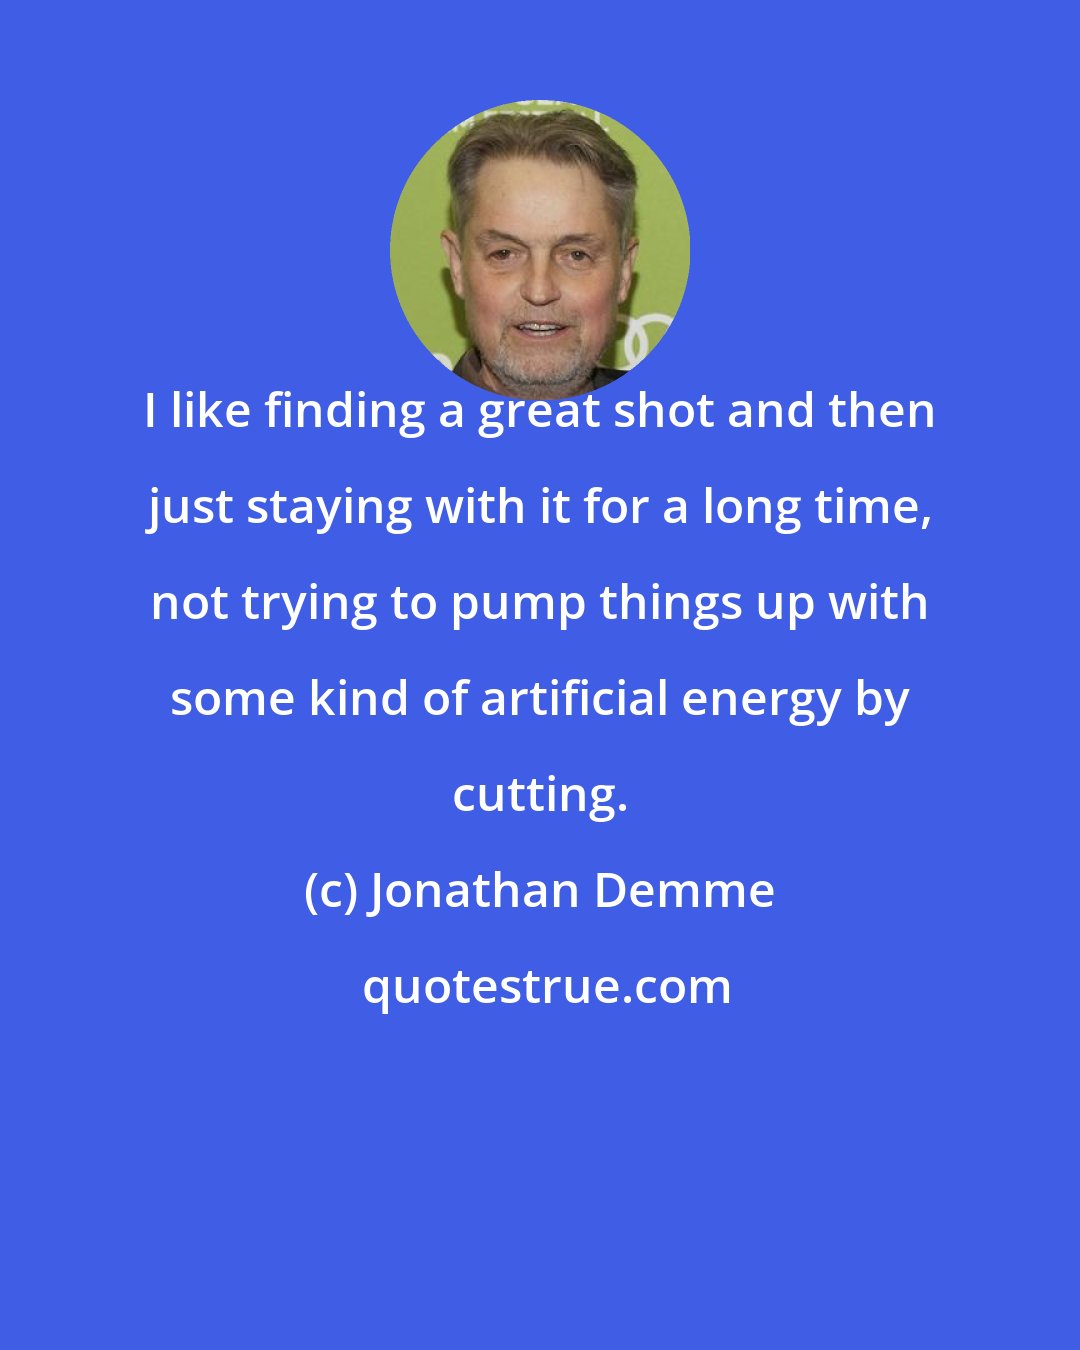 Jonathan Demme: I like finding a great shot and then just staying with it for a long time, not trying to pump things up with some kind of artificial energy by cutting.